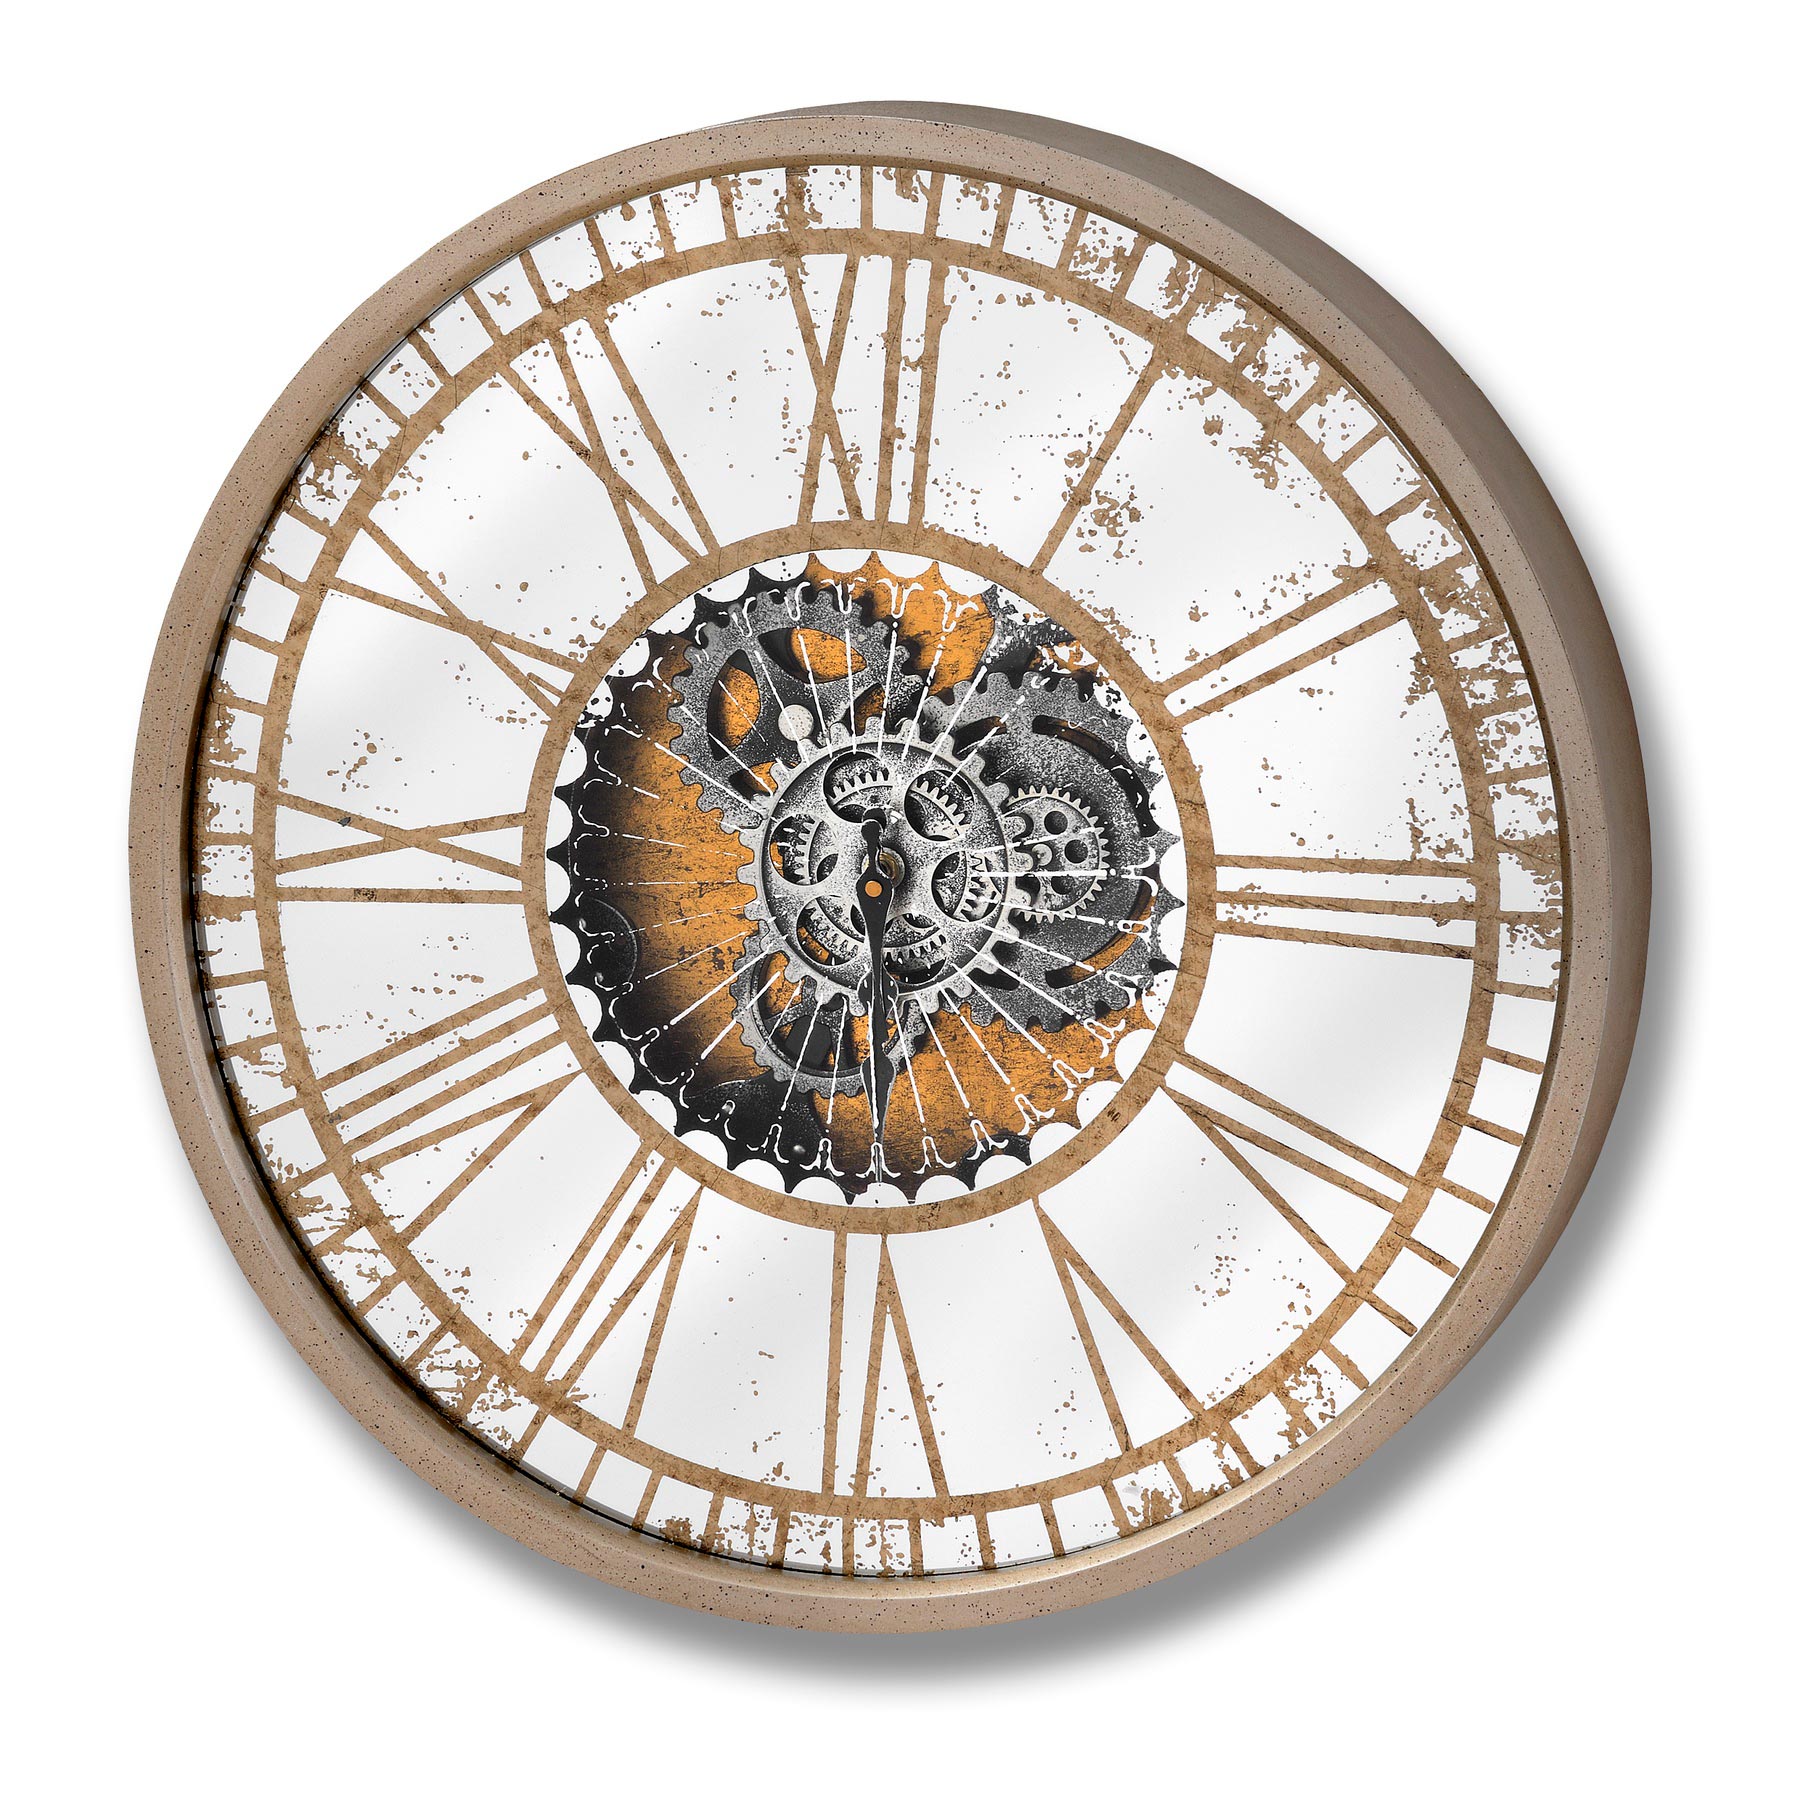 Mirrored Round Clock with Moving Mechanism - Image 1